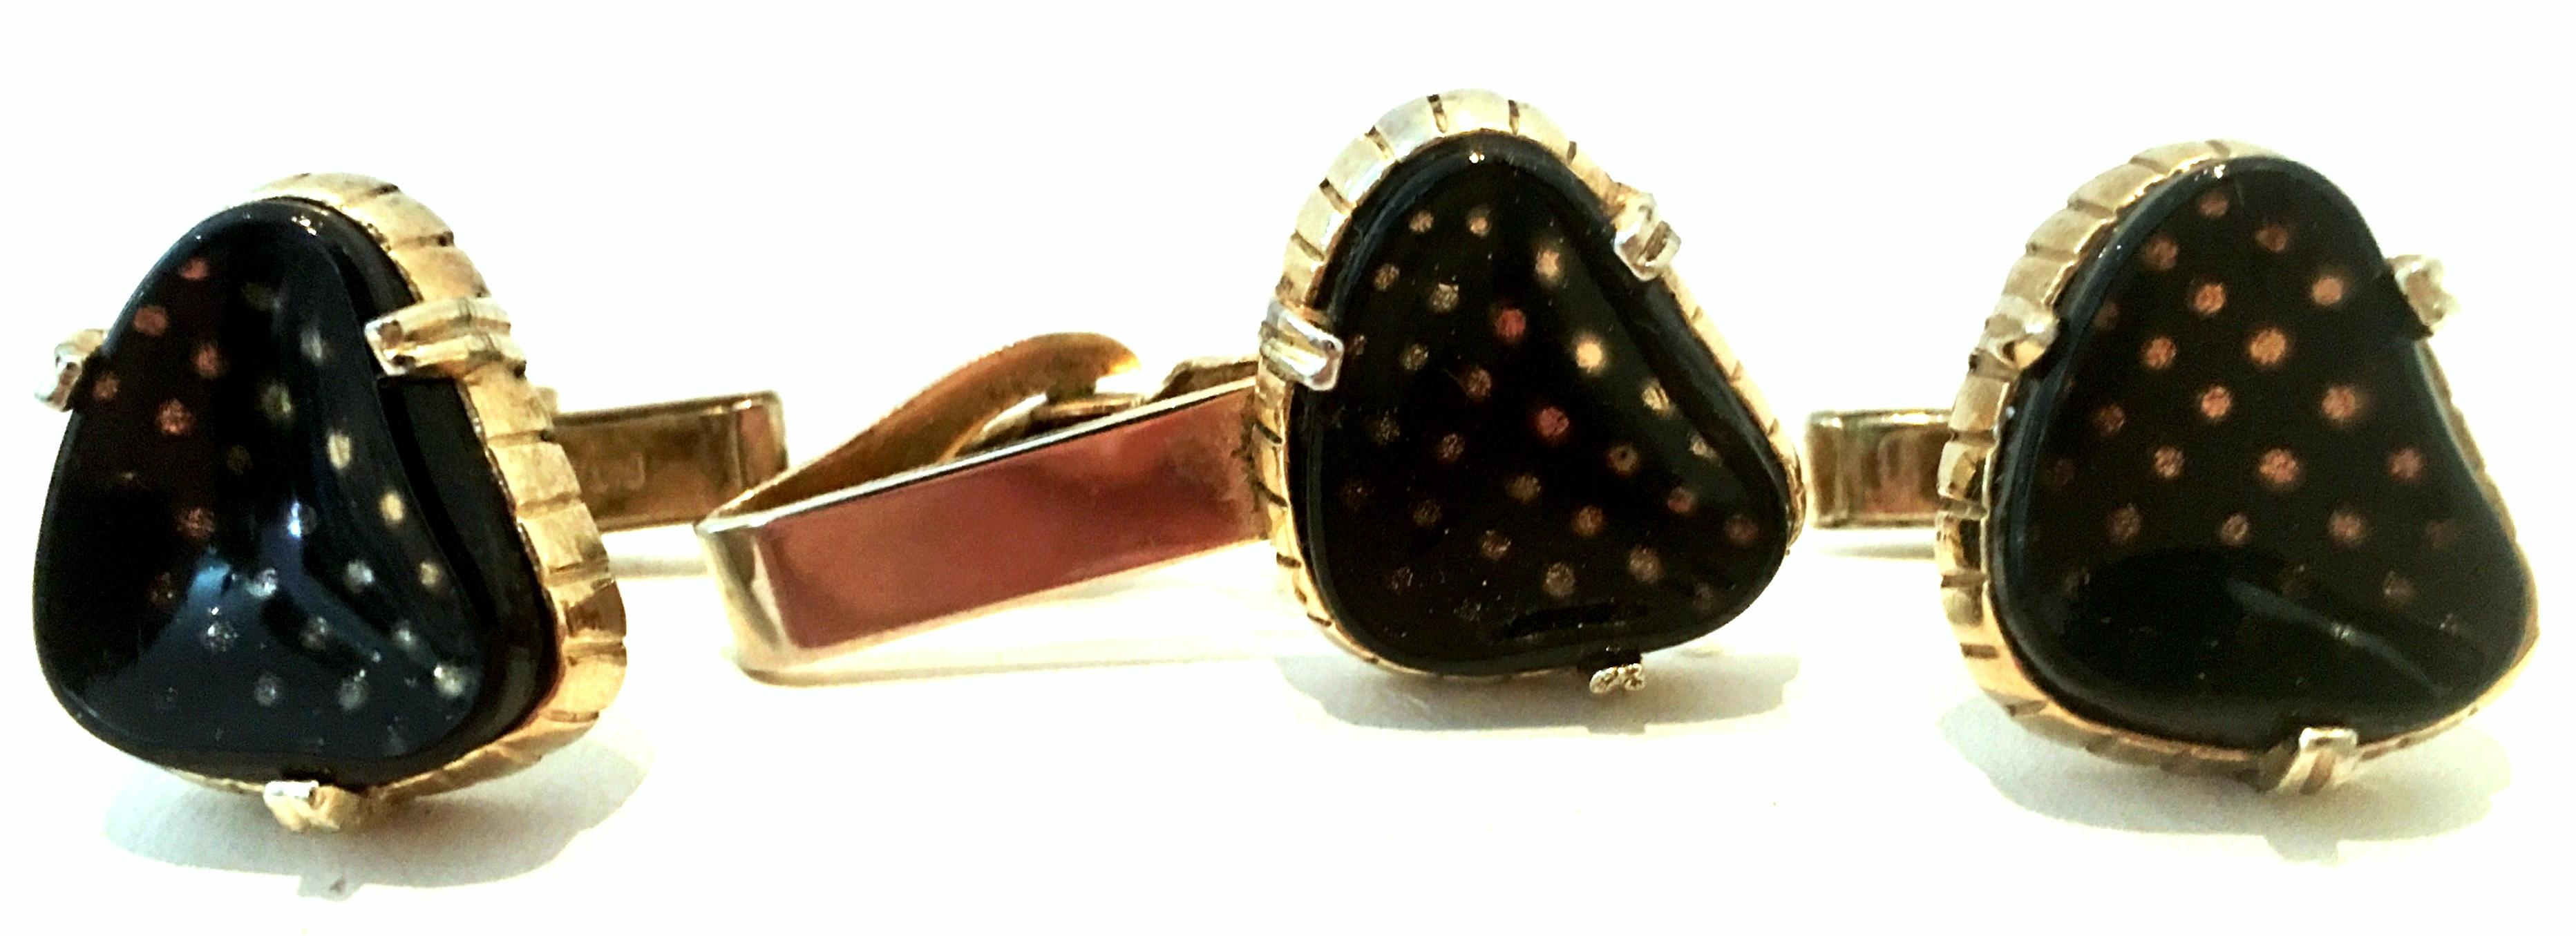 Mid-20th Century Gold Plate And Lucite Pair Of Cuff Links & Tie Clip S/3. This finely crafted set of three pieces features gold plate metal with black enamel and 22-k gold dots under cased Lucite. Signed by and engraved patent number
Tie Clip